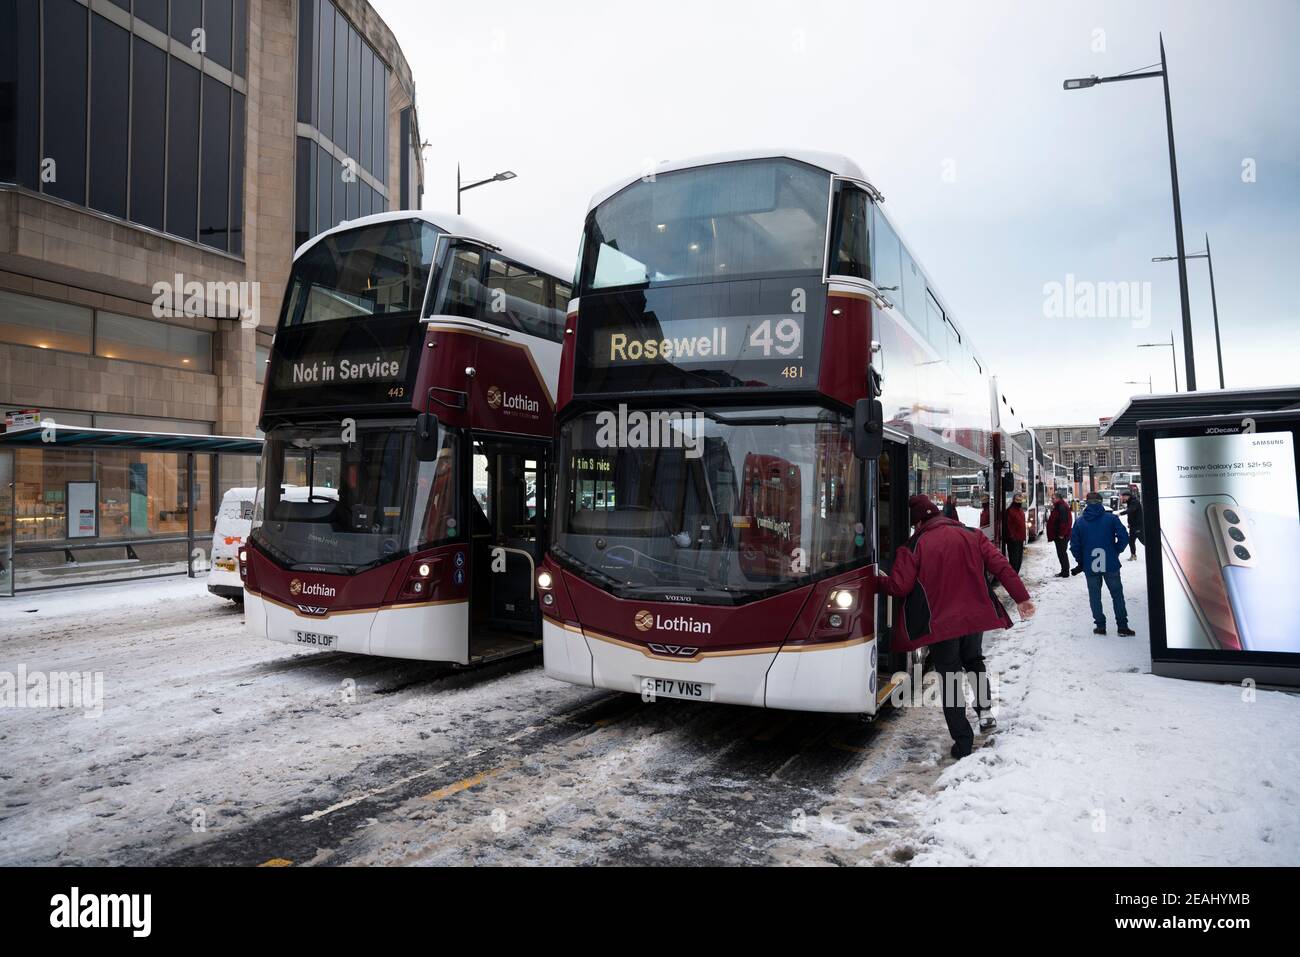 Edinburgh, Scotland, UK. 10 Feb 2021. Big freeze continues in the UK with heavy overnight and morning snow bringing traffic to a standstill on many roads in the city centre. Pic; Lothian Buses bus drivers pass the time waiting for road to clear on Leith Walk.  Iain Masterton/Alamy Live news Stock Photo